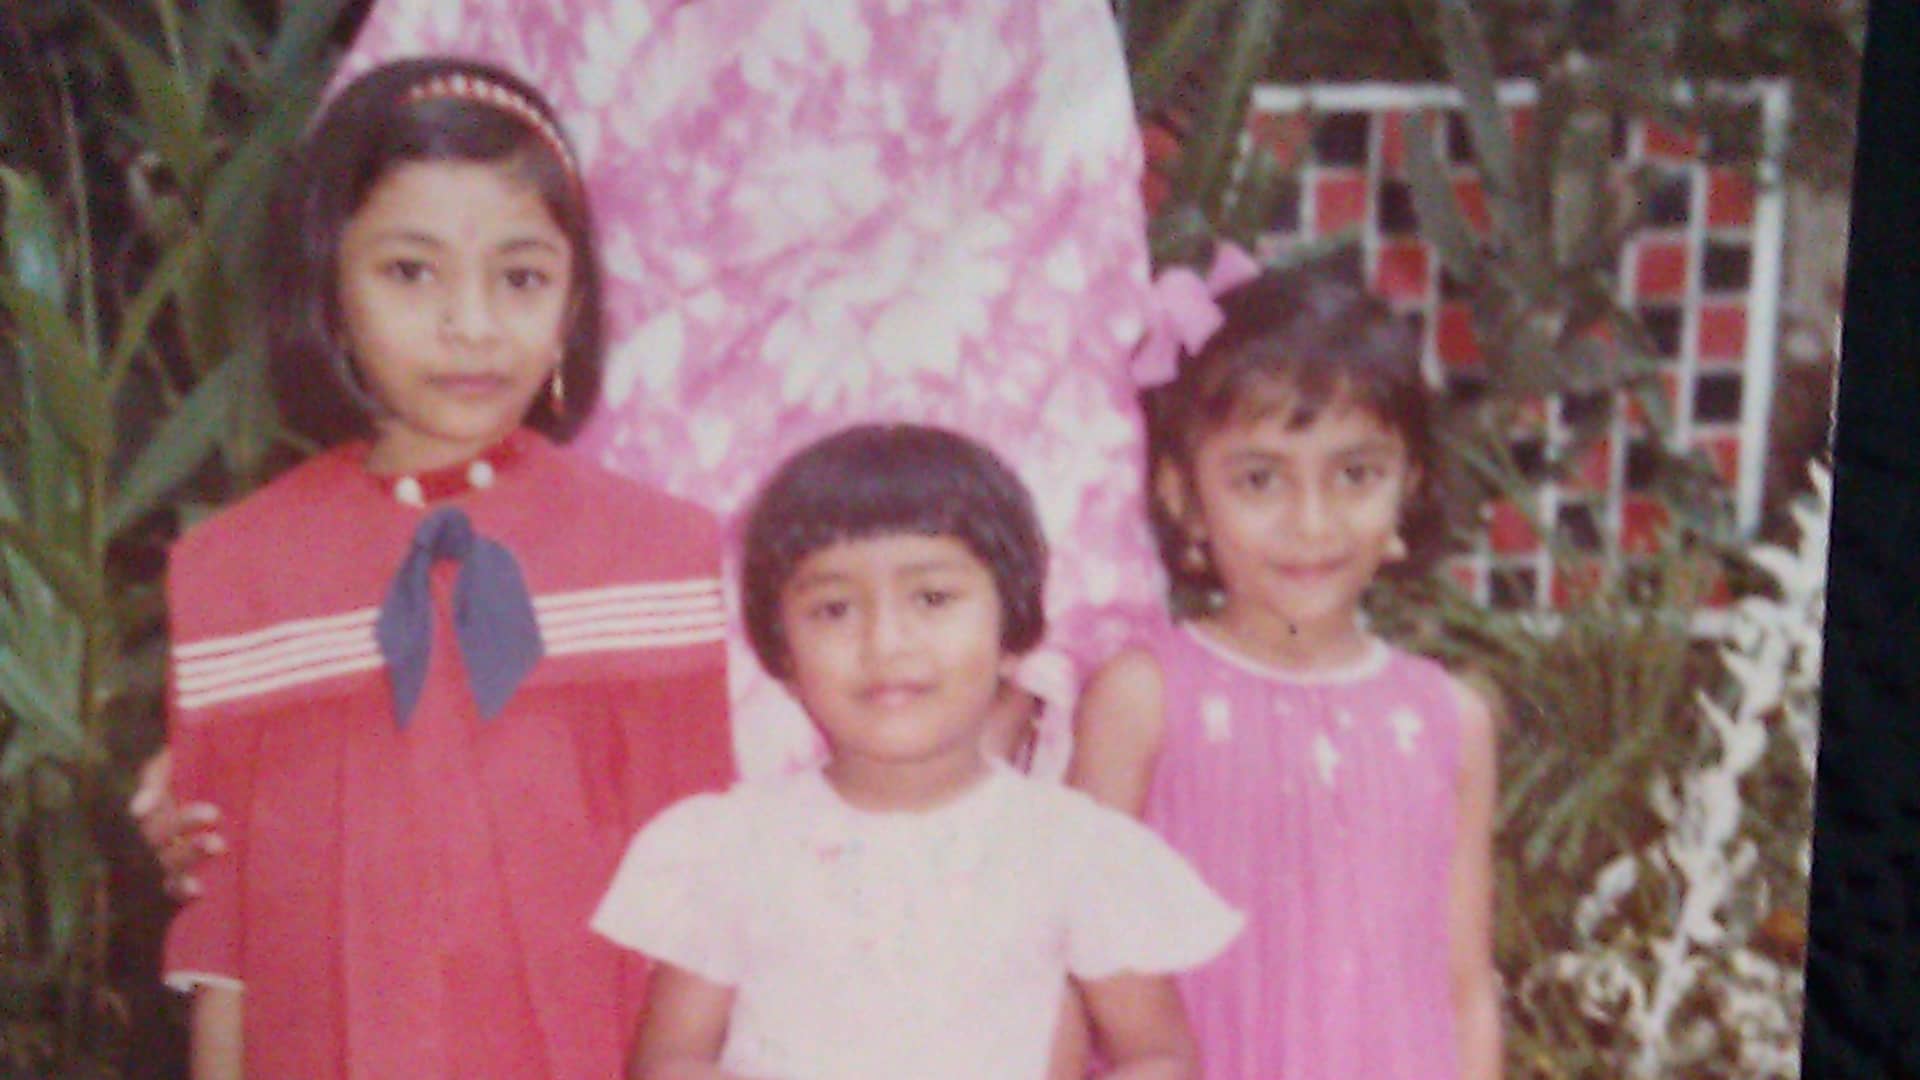 Suni Gargaro, in front row in the middle, with her mom standing in the back, at a family event in India.